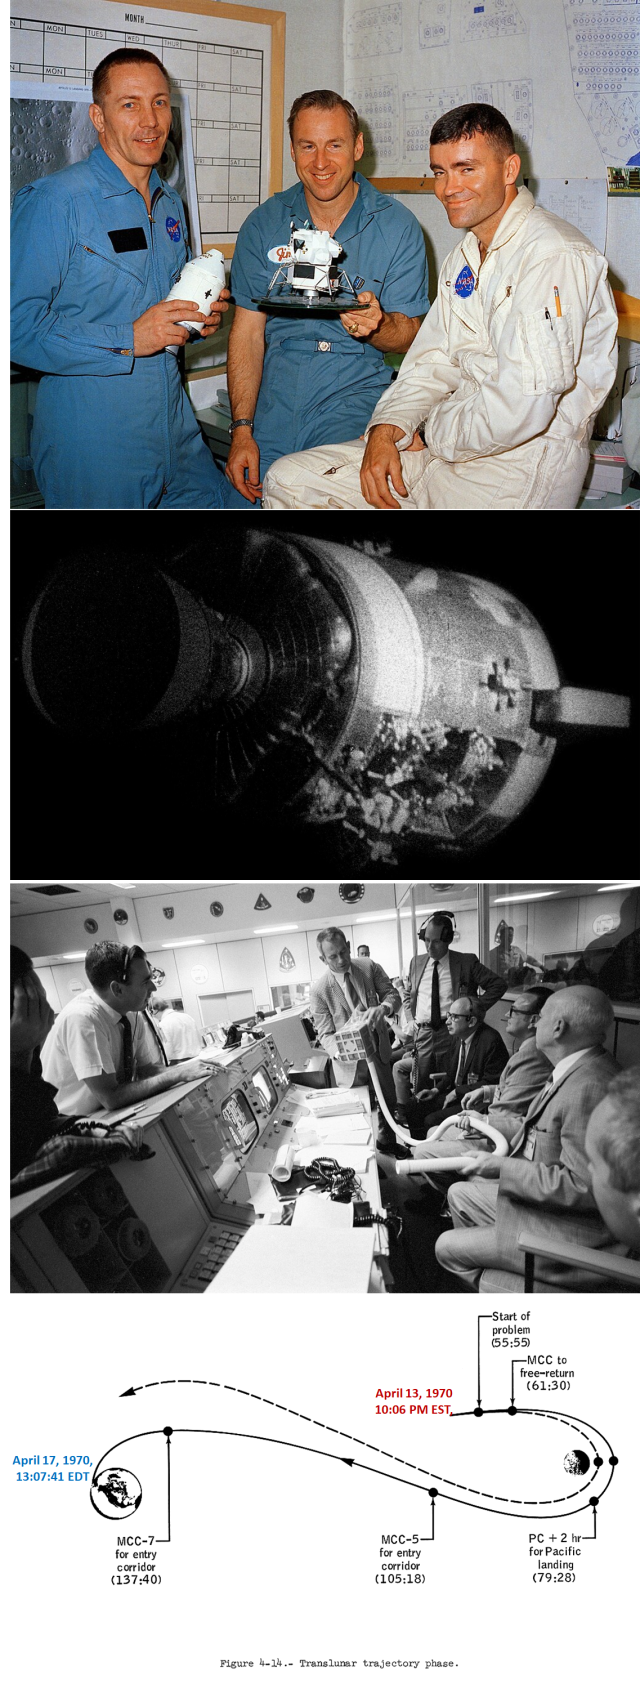 1. Swigert, Lovell and Haise the day before launch
2. Odyssey's damaged service module, as seen from the Apollo Lunar Module Aquarius, hours before reentry
3. Deke Slayton (checked jacket) shows the adapter devised to make use of square Command Module lithium hydroxide canisters to remove excess carbon dioxide from the Apollo 13 LM cabin.
4. The modified trajectory of Apollo 13 after the explosion.